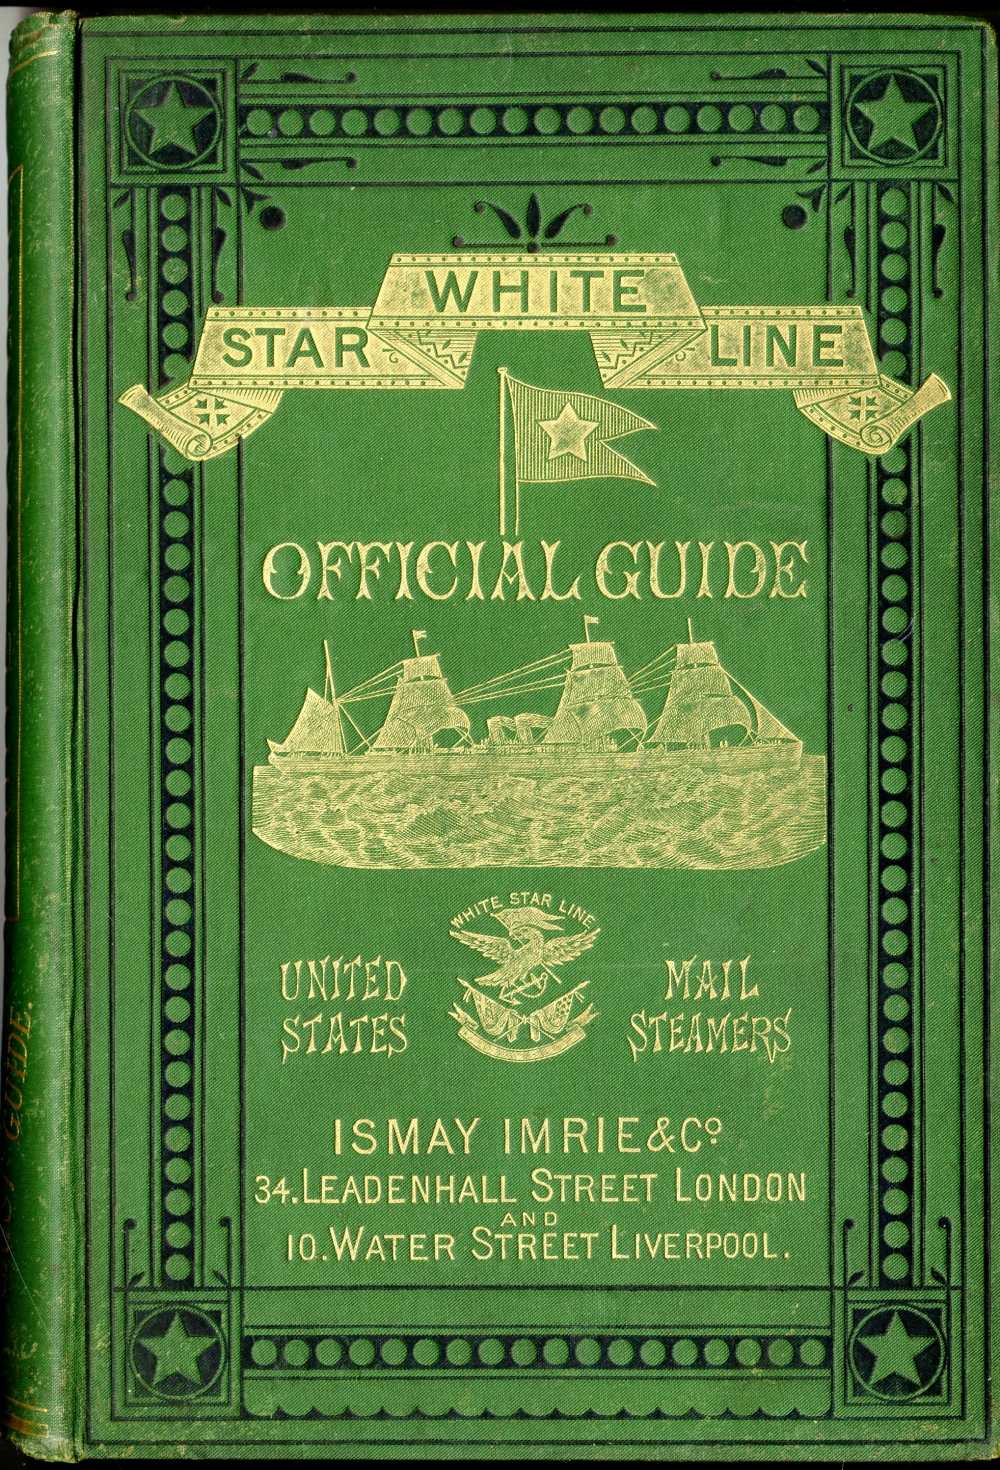 WHITE STAR LINE: 1877 Hardbound volume "The White Star Line" Official Guide - United States Mail